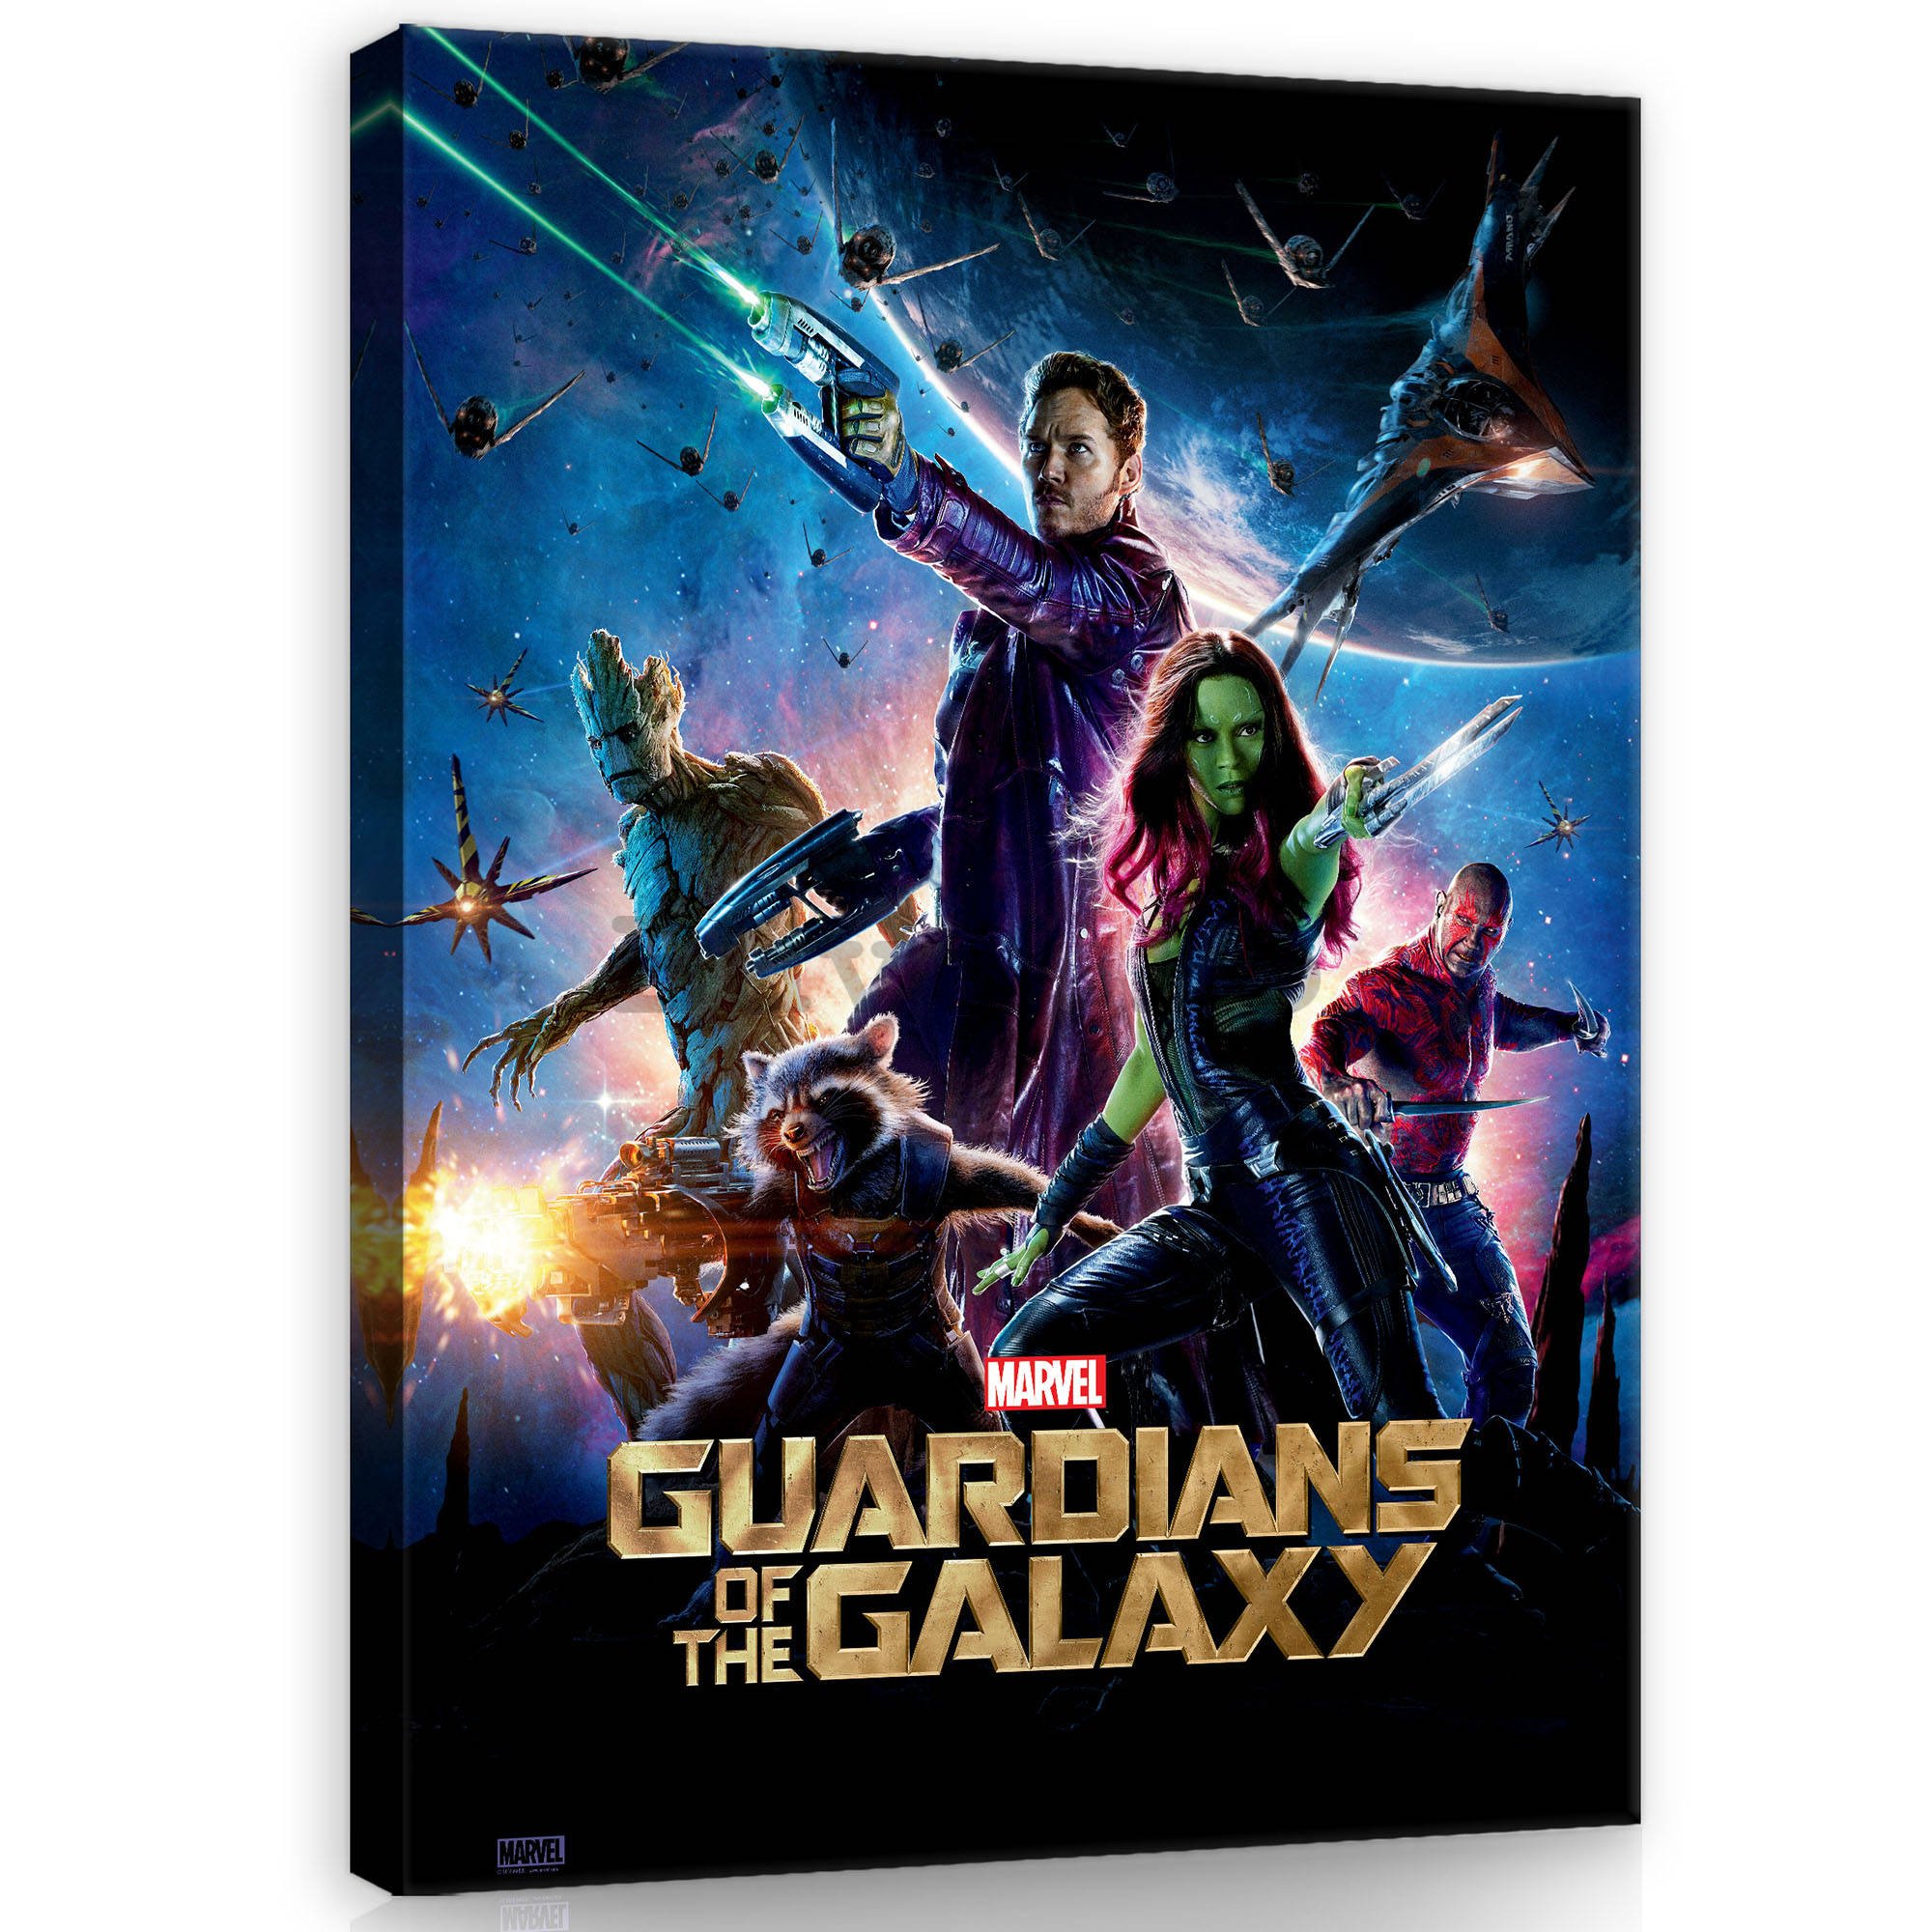 Tablou canvas: Guardians of The Galaxy Poster - 75x100 cm